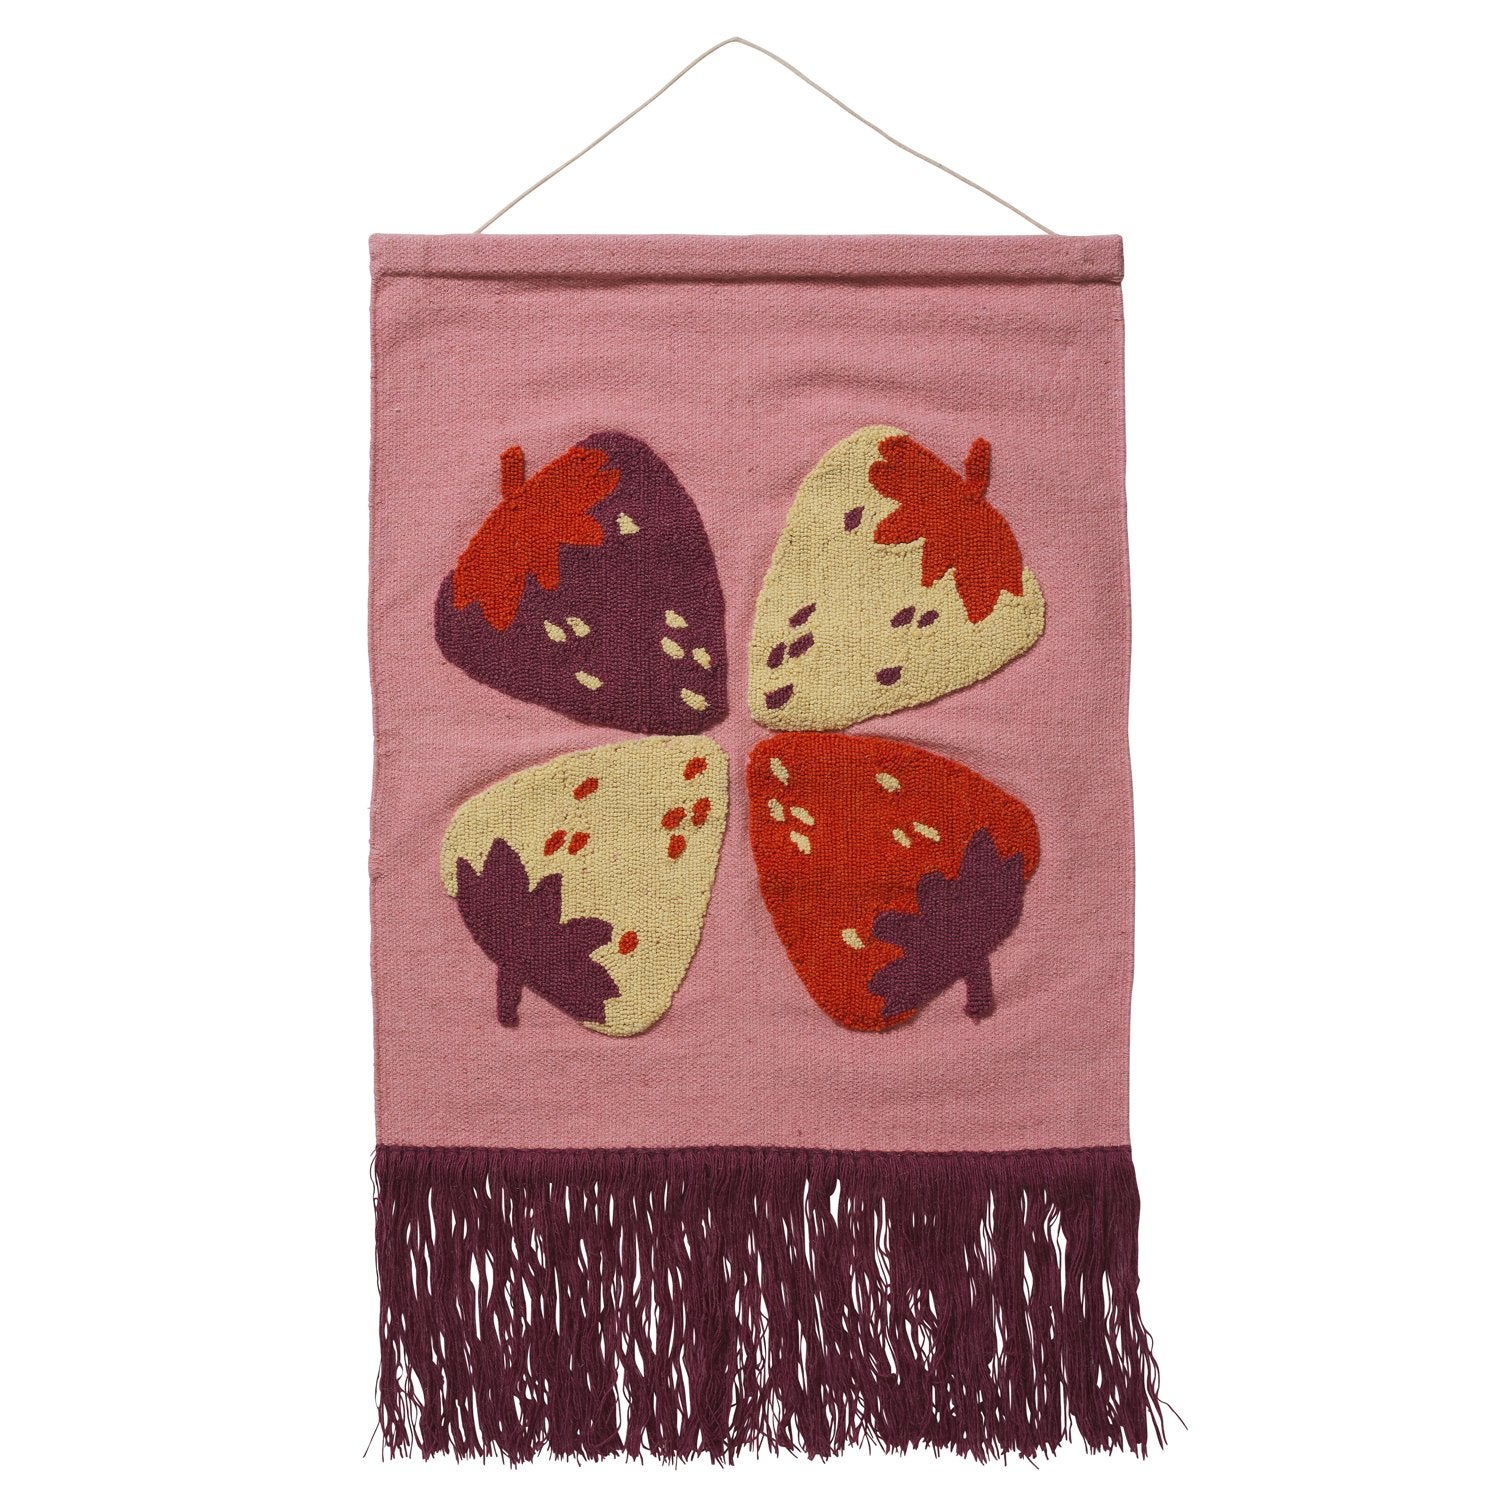 Iselle-Woven-Wall-Hanging_1800x1800